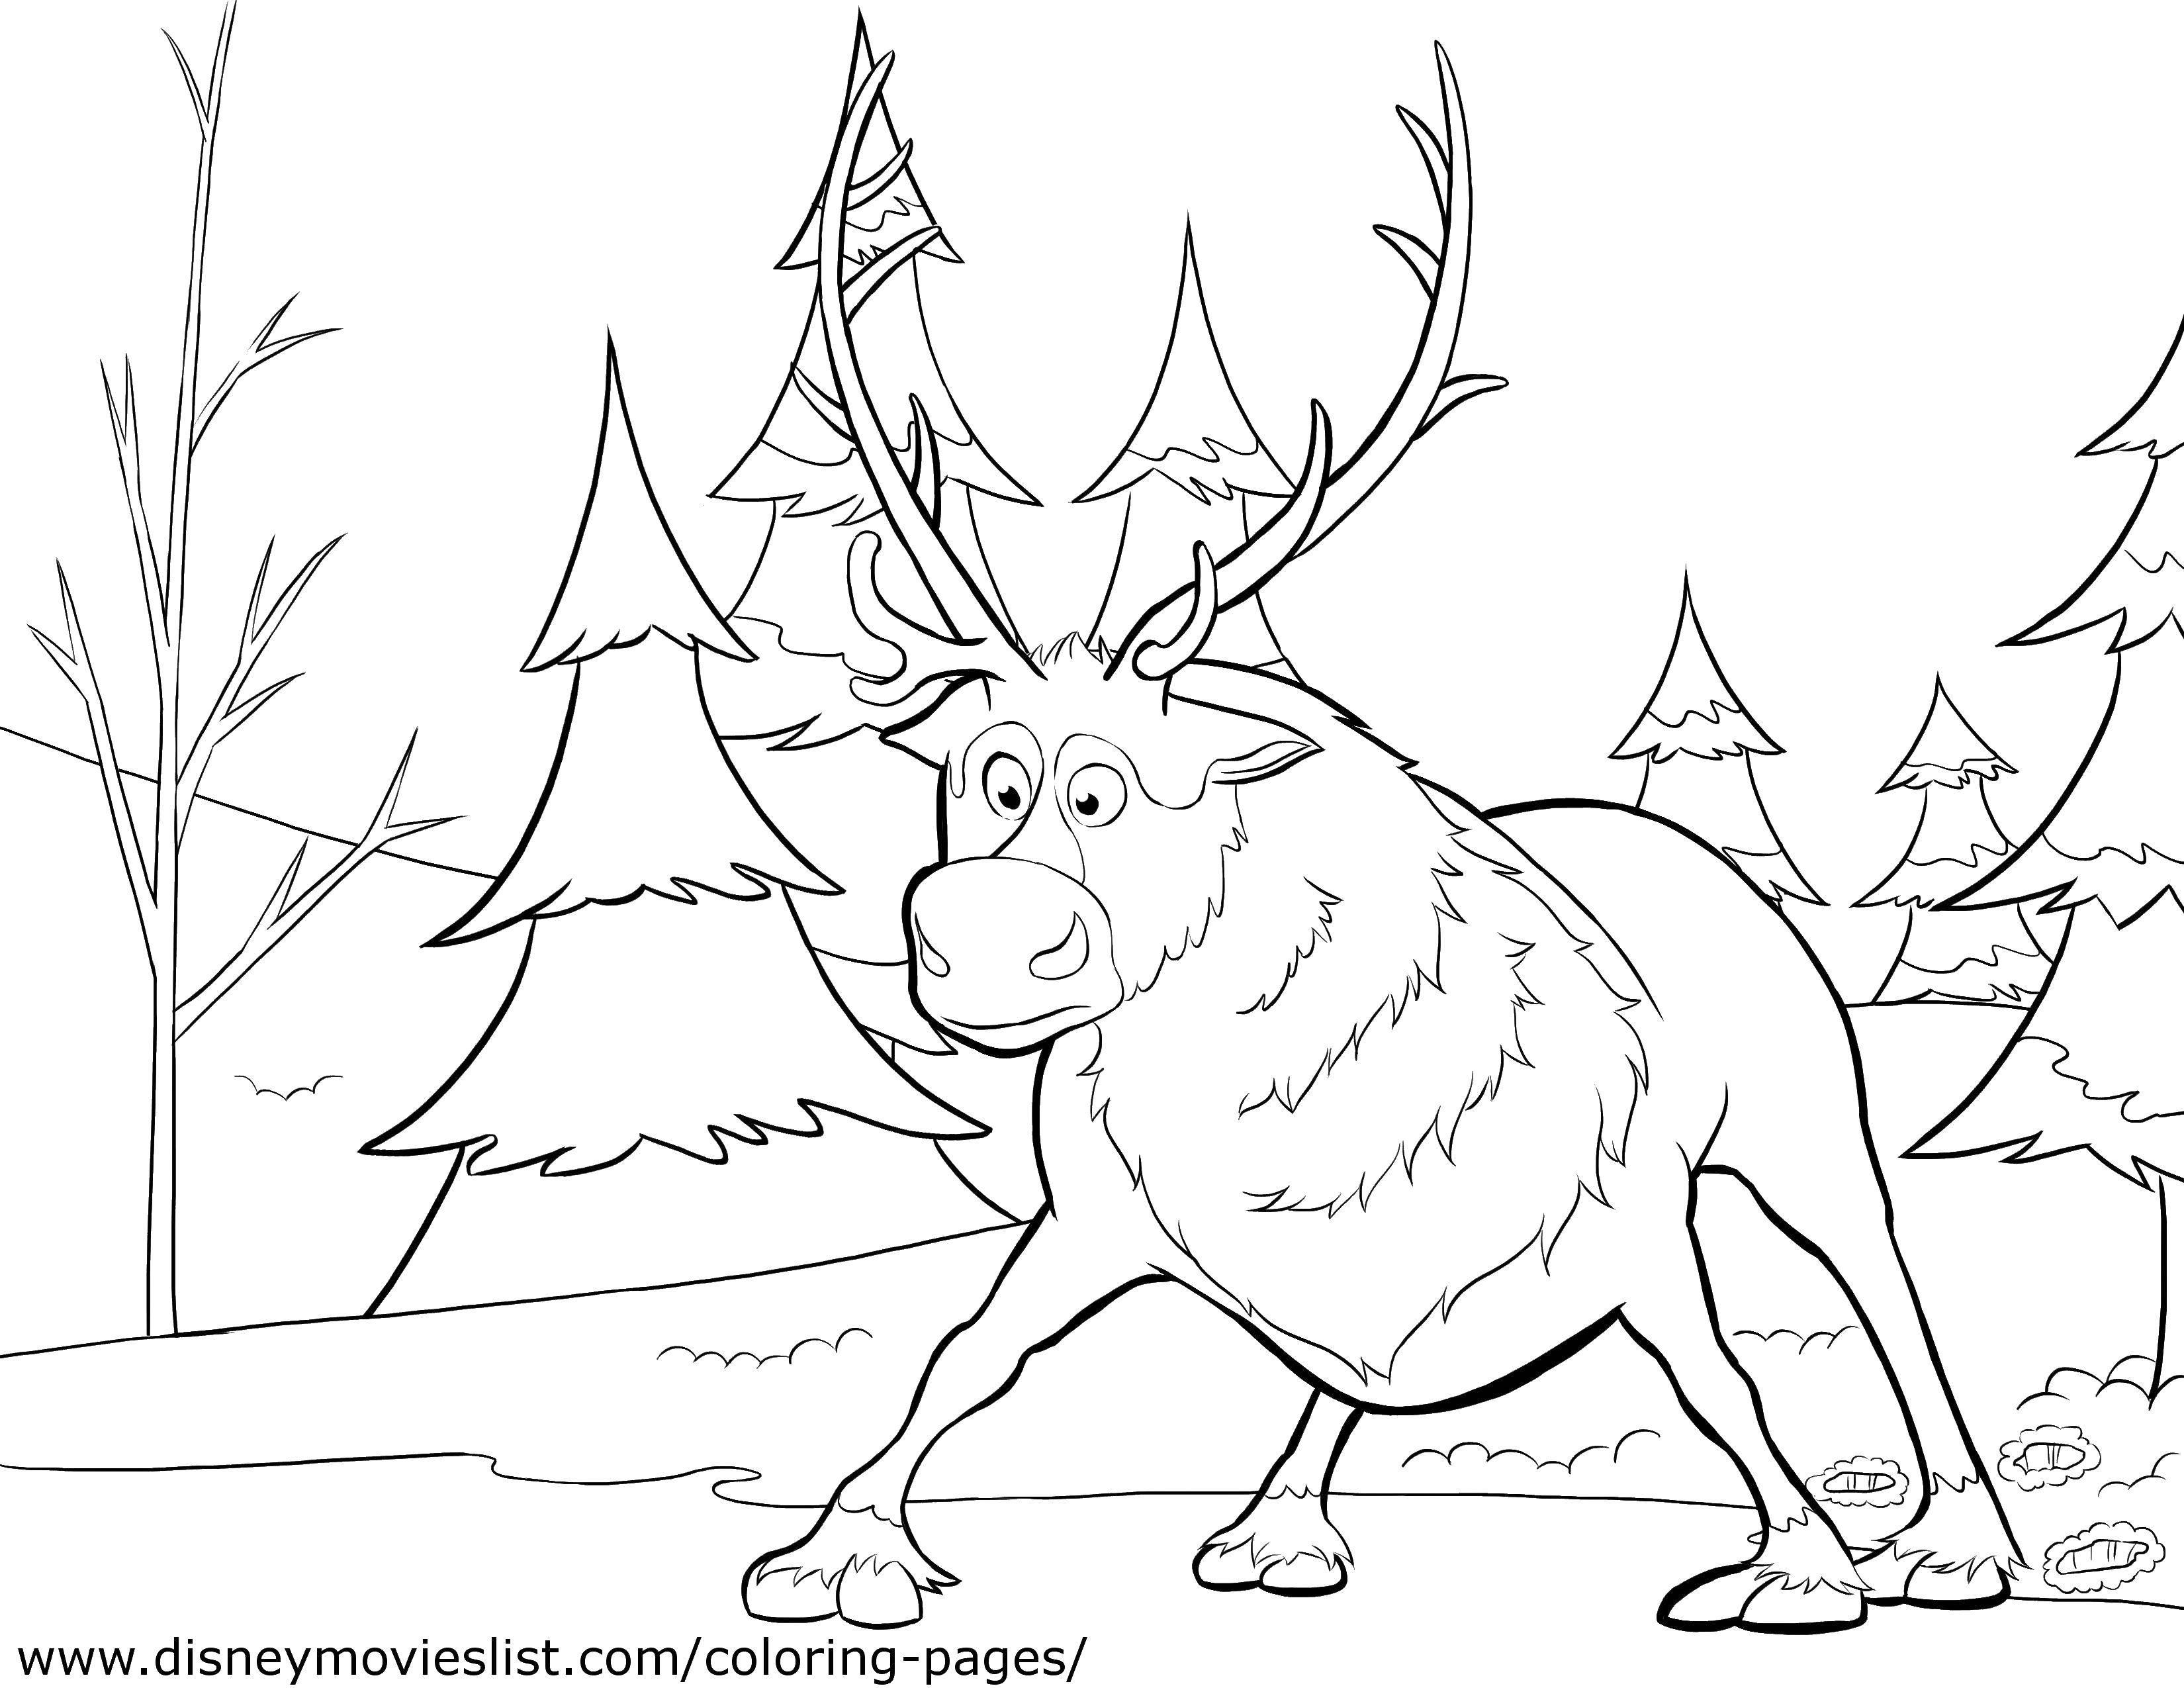 Coloring Moose on the ice. Category Animals. Tags:  animals, elk, ice.